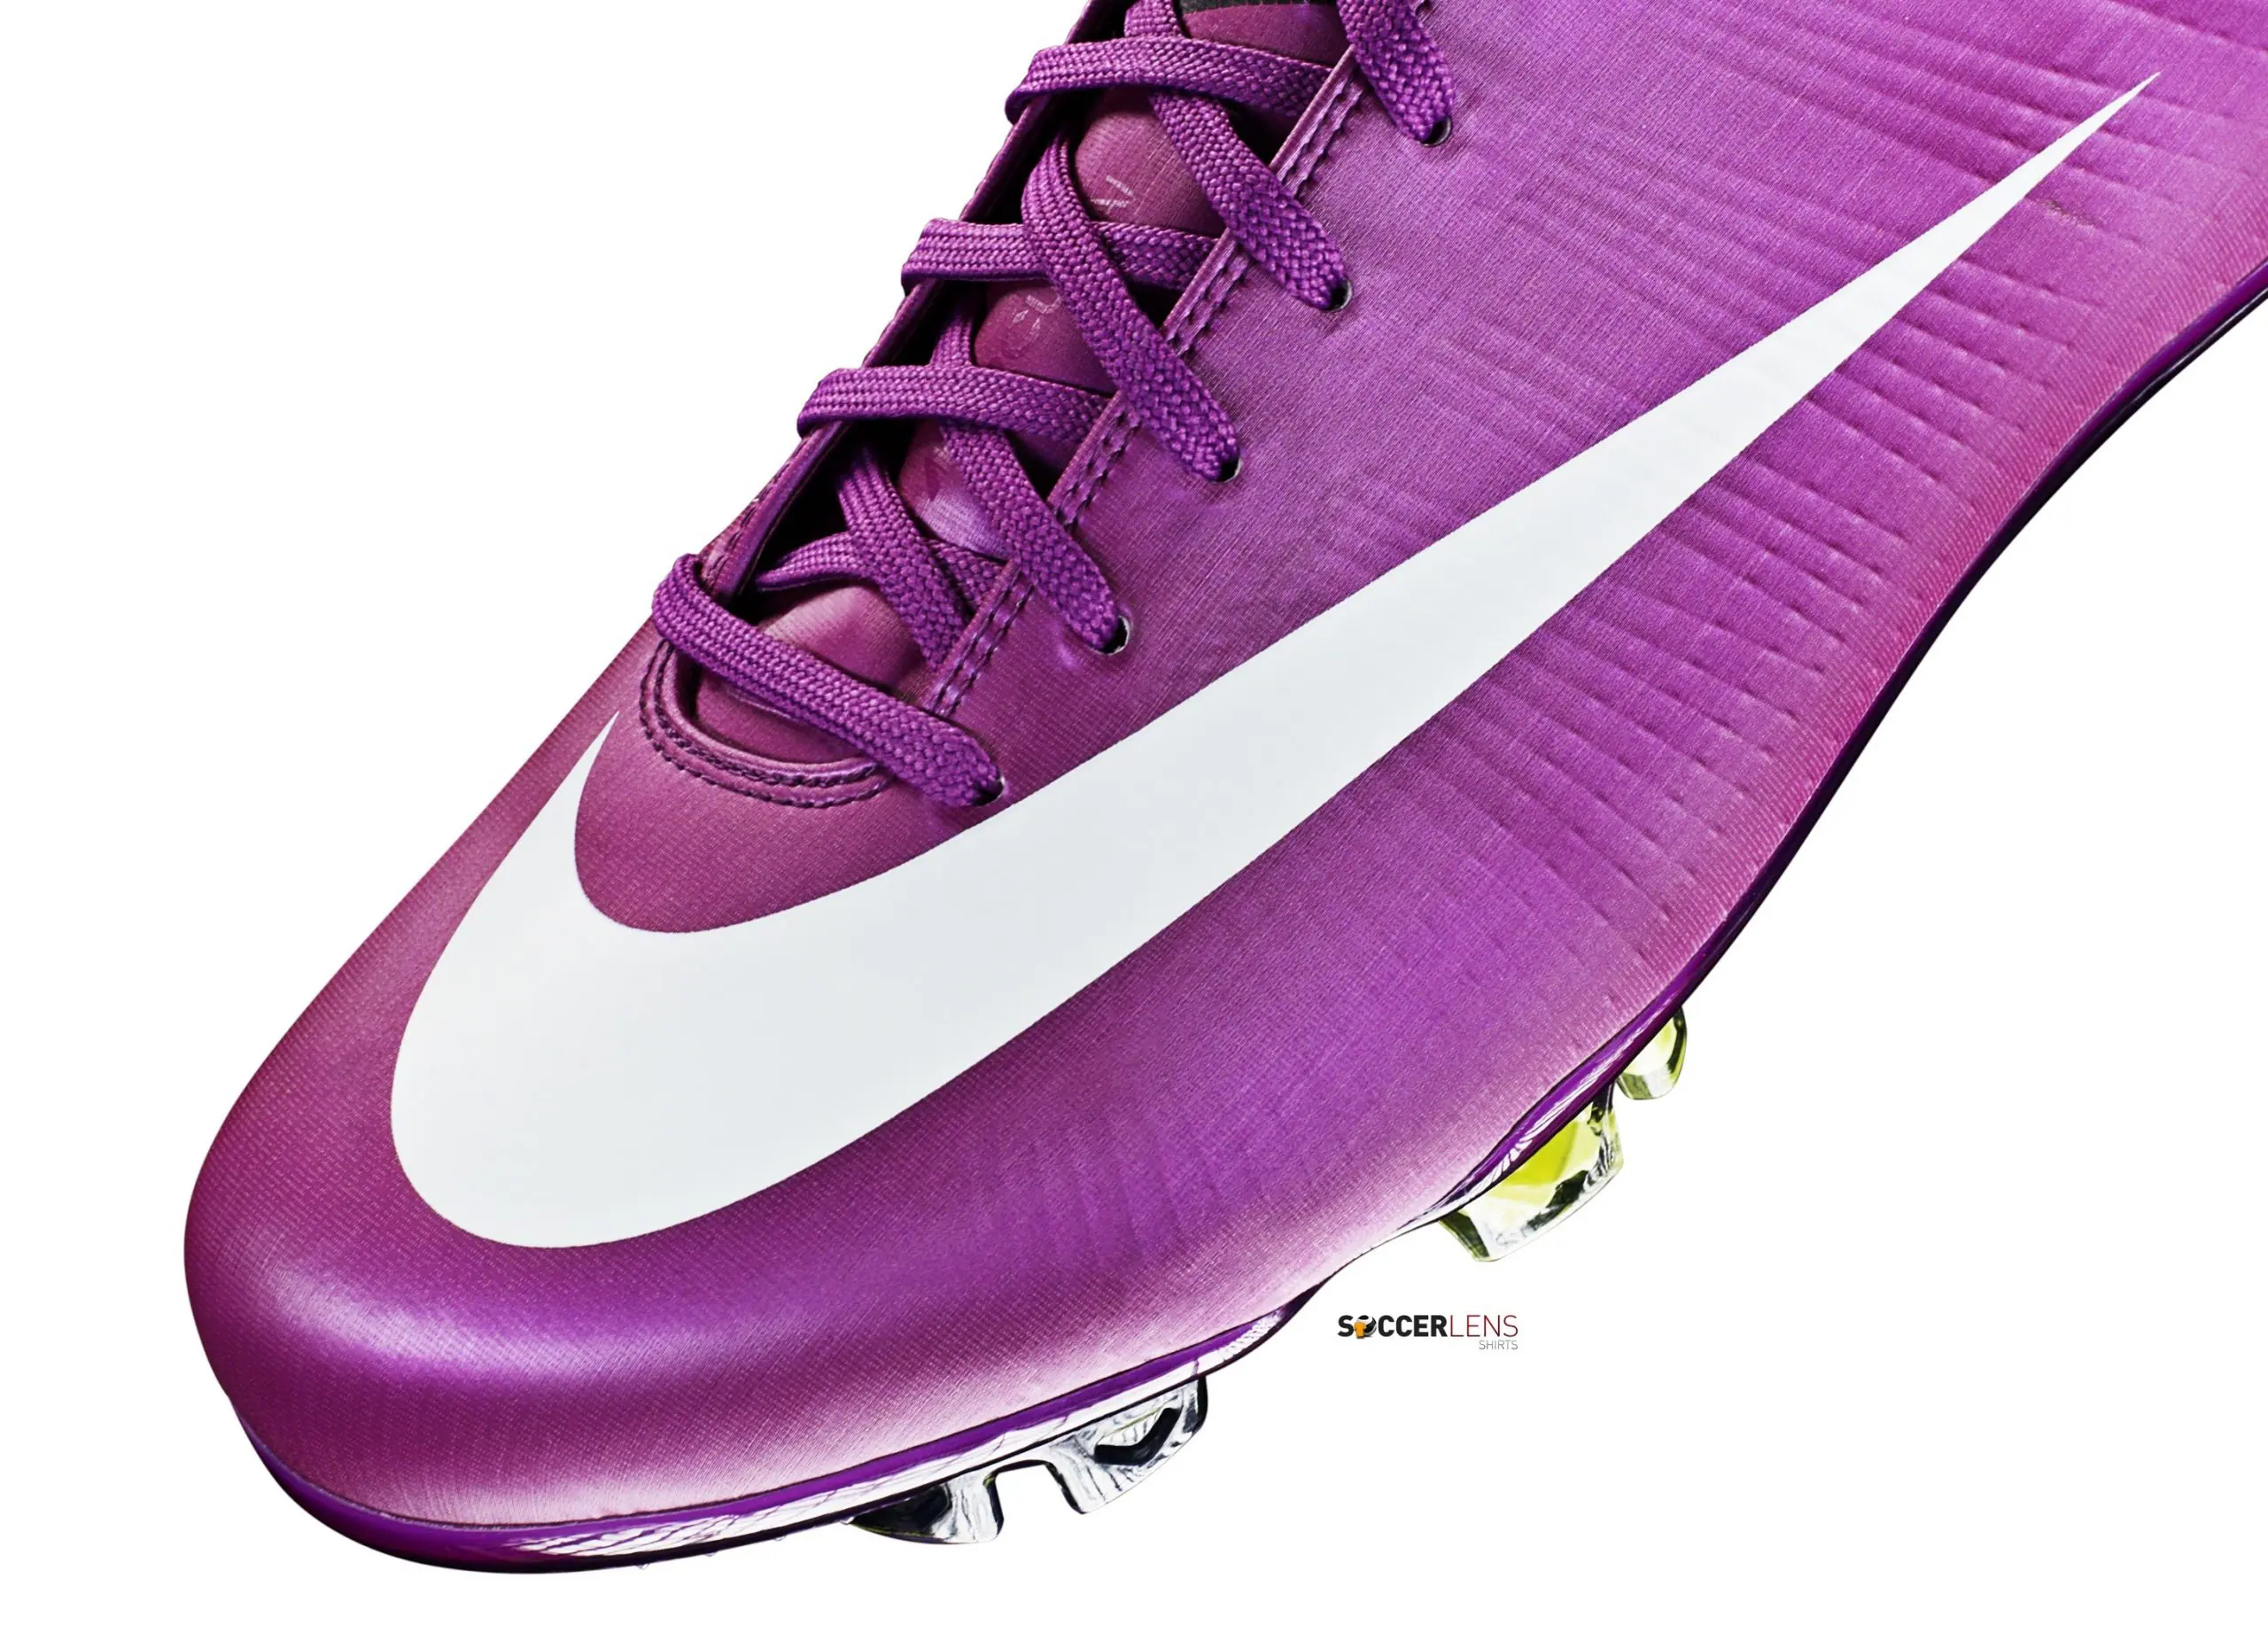 Nike Superfly III - A Closer Look and Review